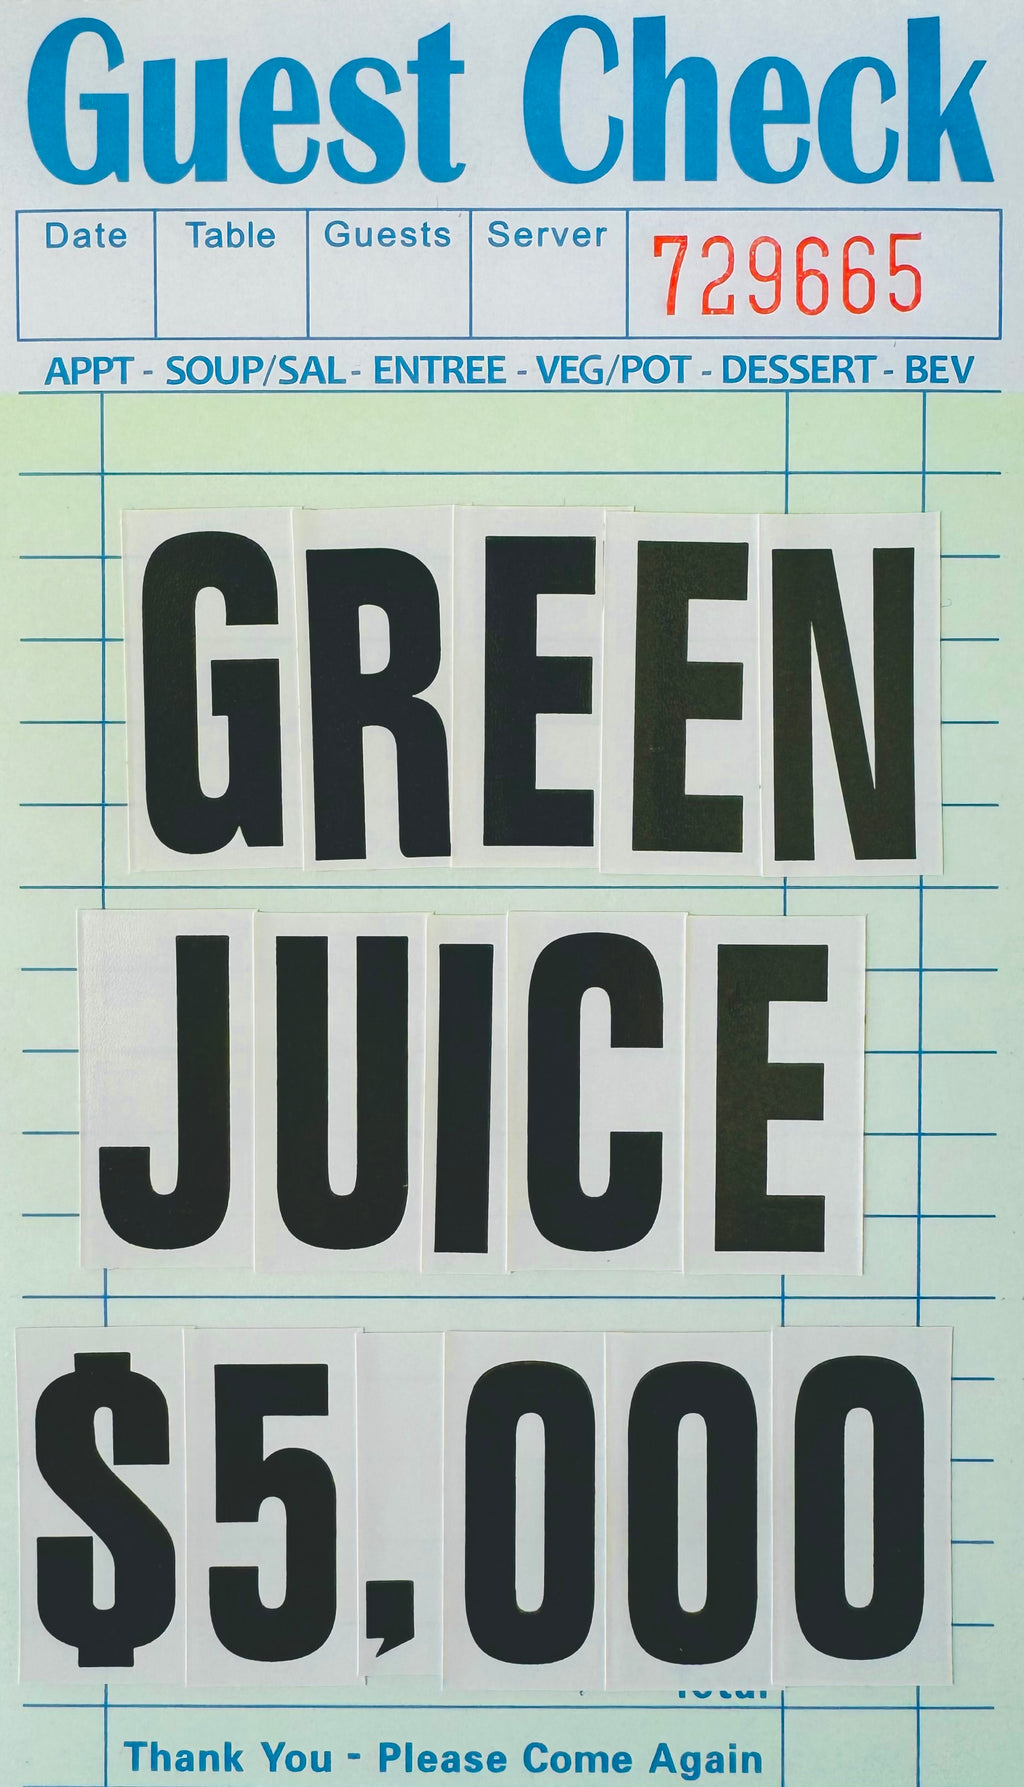 The $5,000 Green Juice - 12x18in